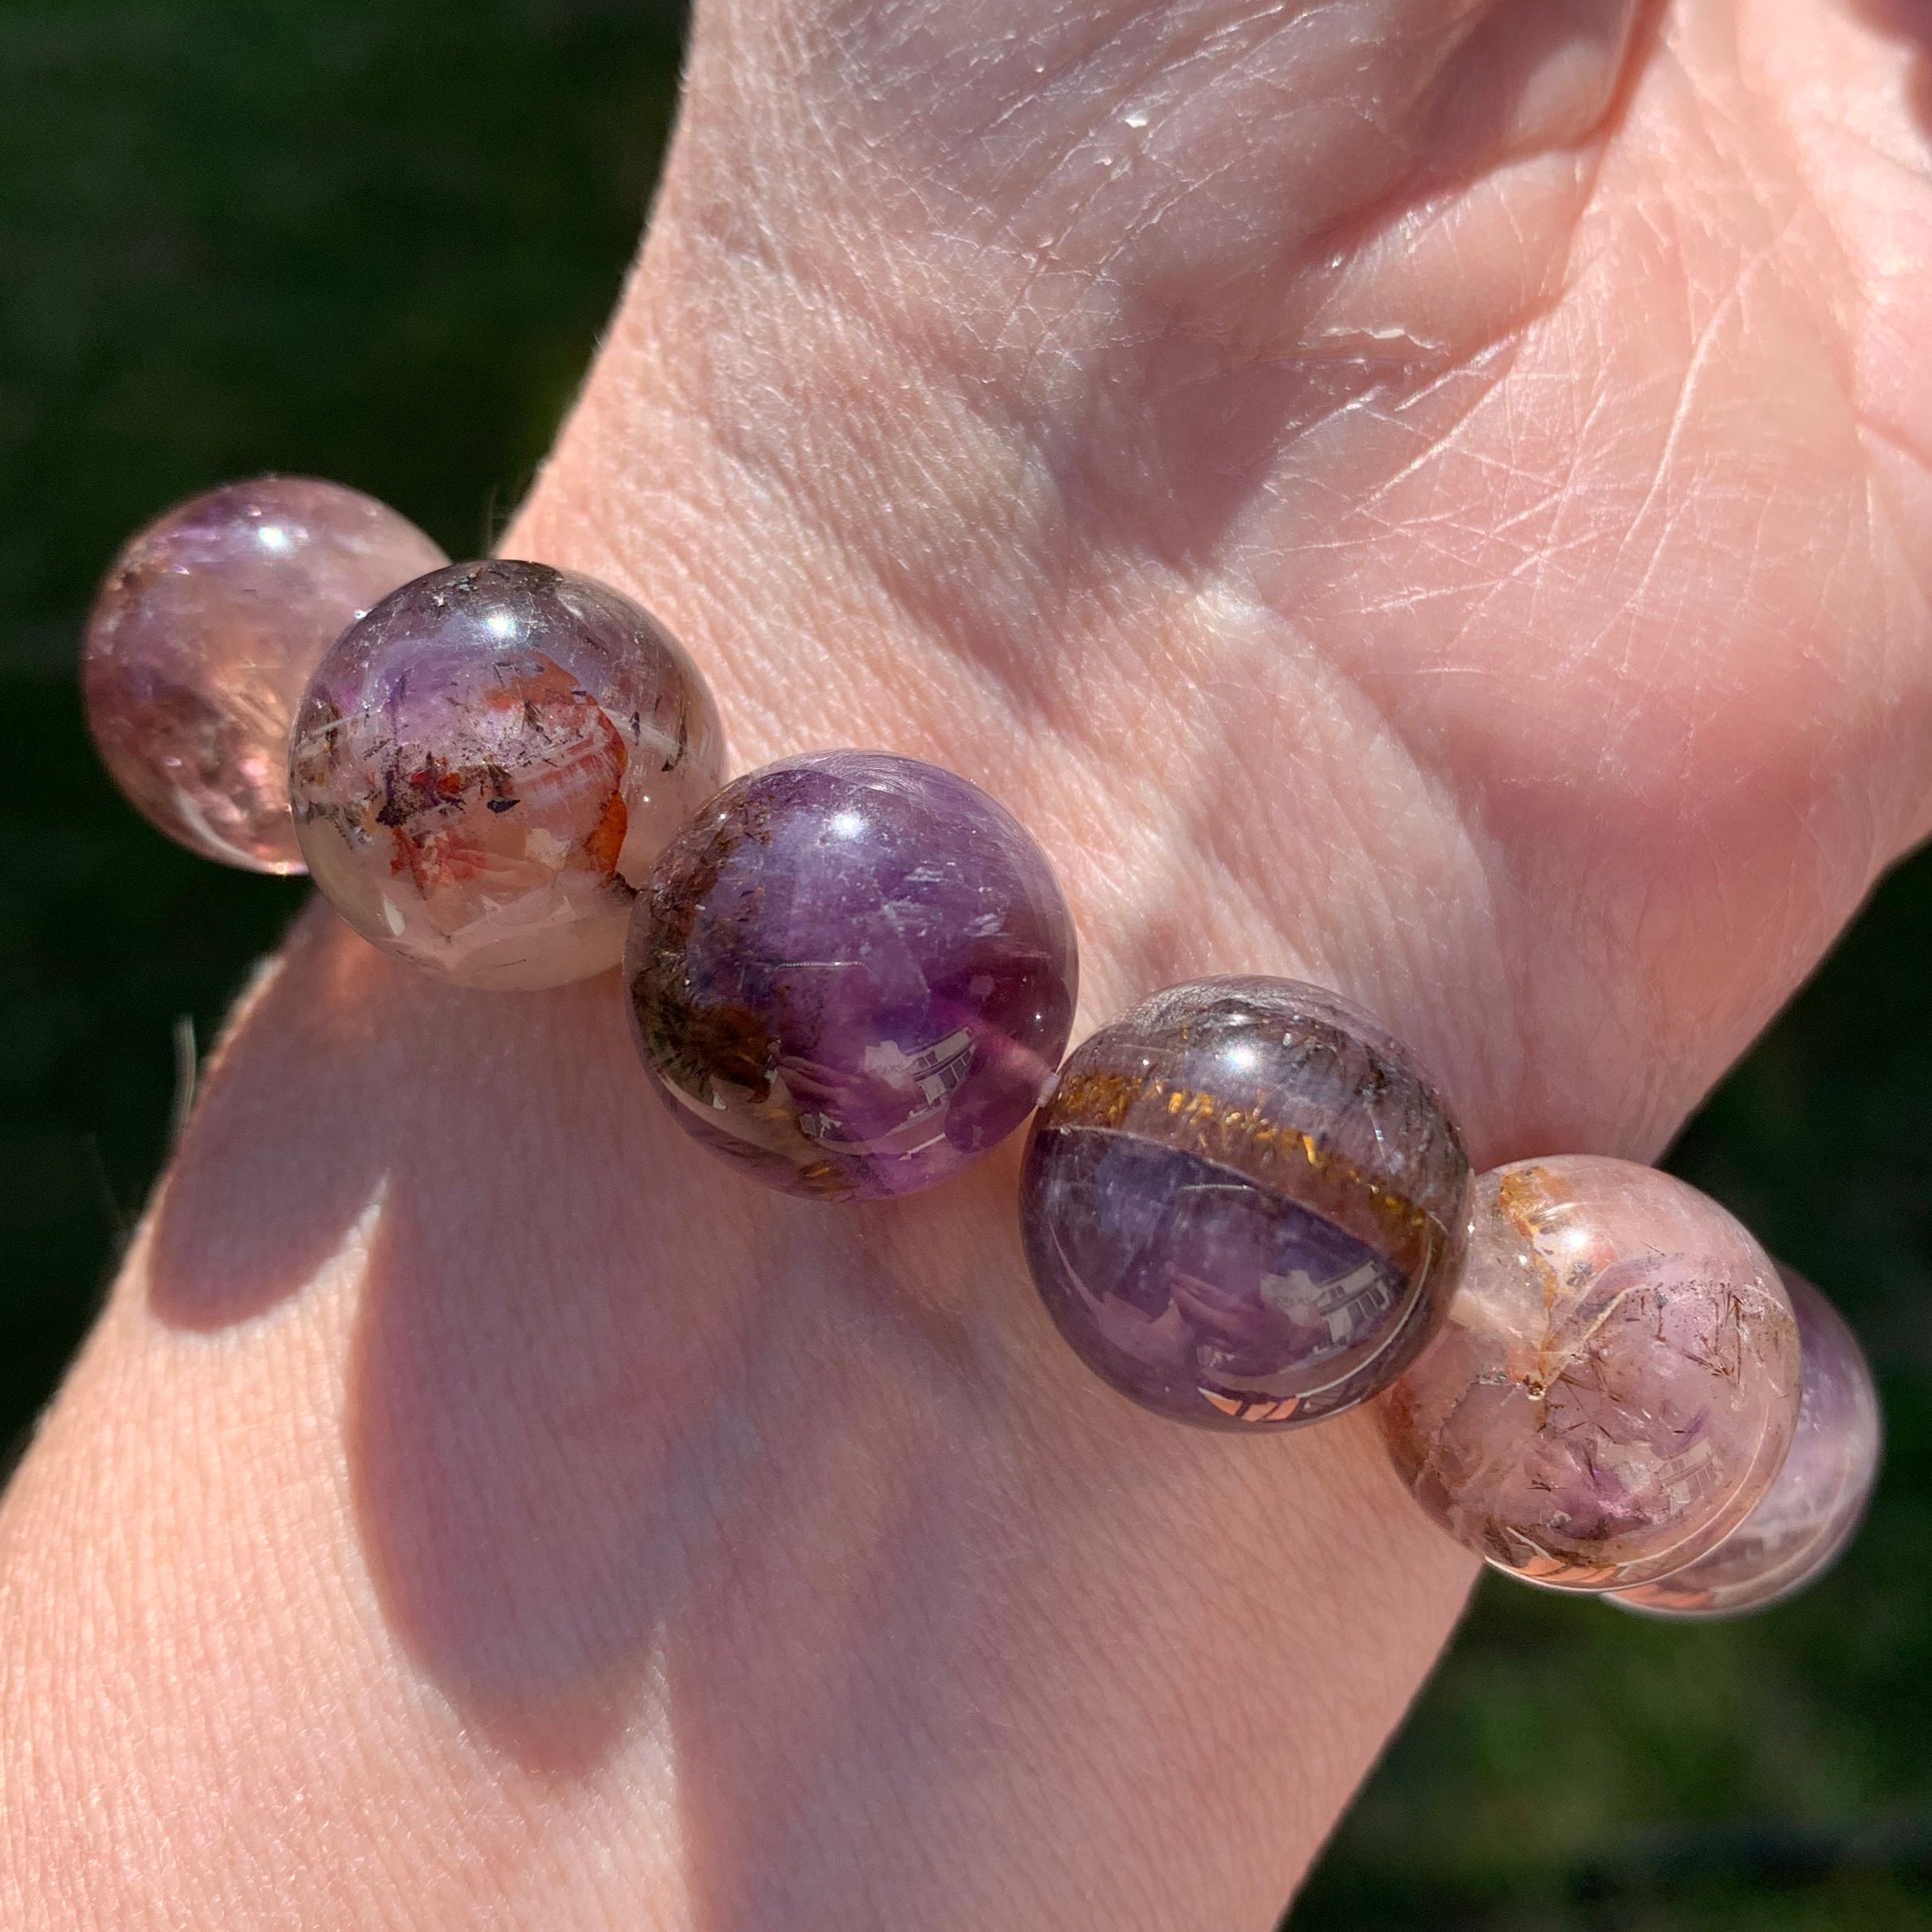 AURALITE 23 BRACELET ₱1,300 BEADS SIZE 7MM WRIST SIZE 16CM Auralite-23 is  excellent tool for spiritual healing, brings about inner… | Instagram